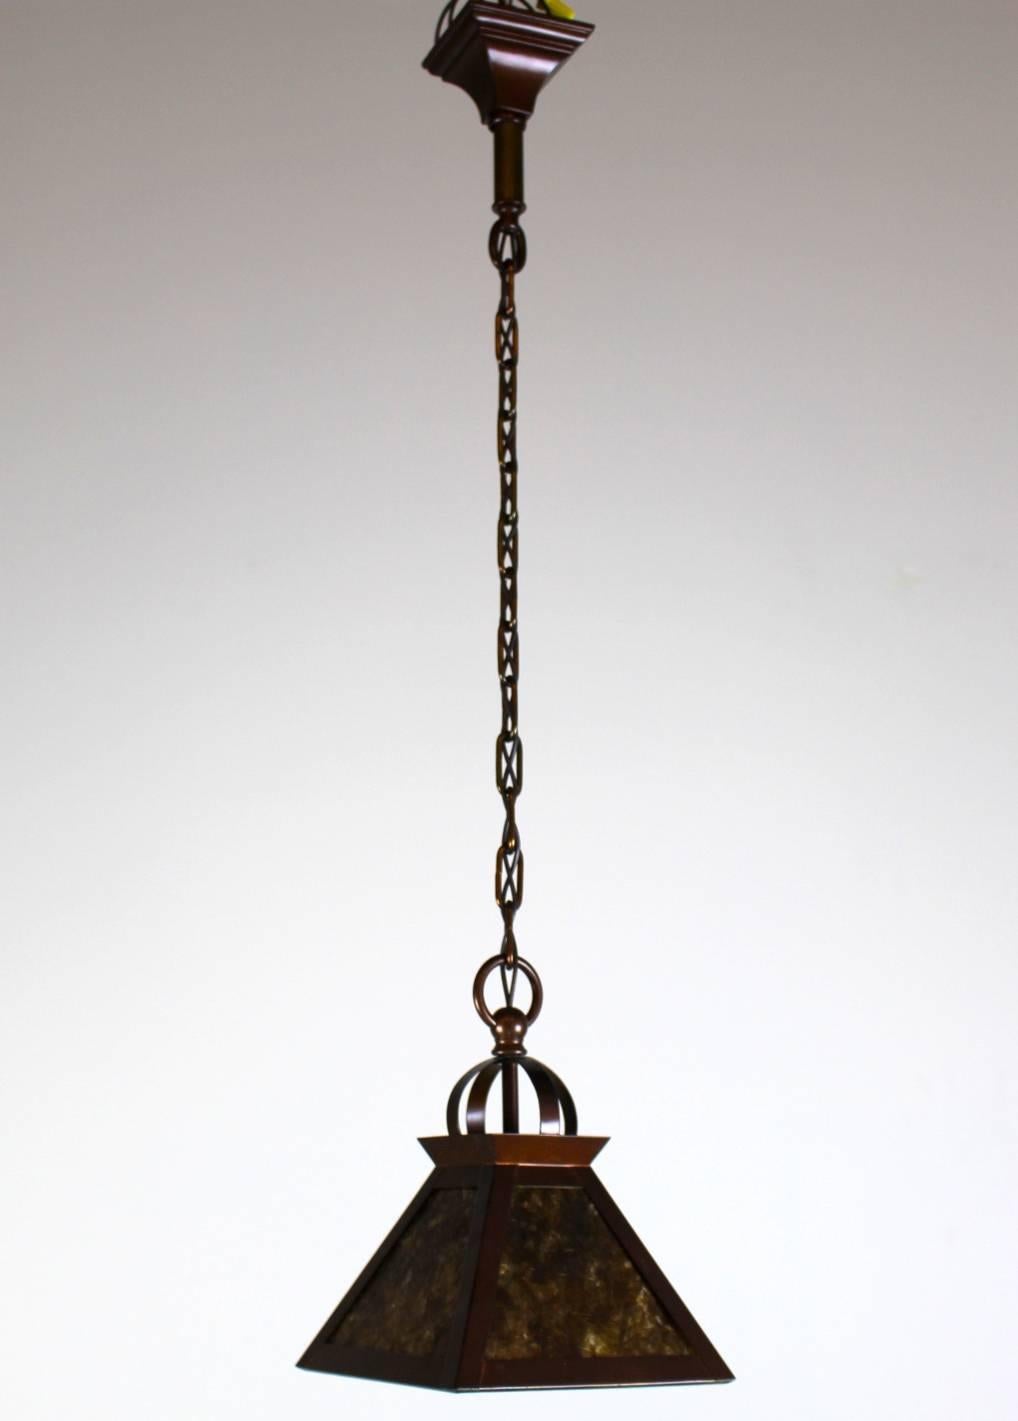 Gorgeous little Arts & Crafts era Mica Pendant.

Nice contrast between square pyramid shade and curved loops on top.

Finished in a dark copper colour with a warm mica shade.

C. 1915

Meas: 32